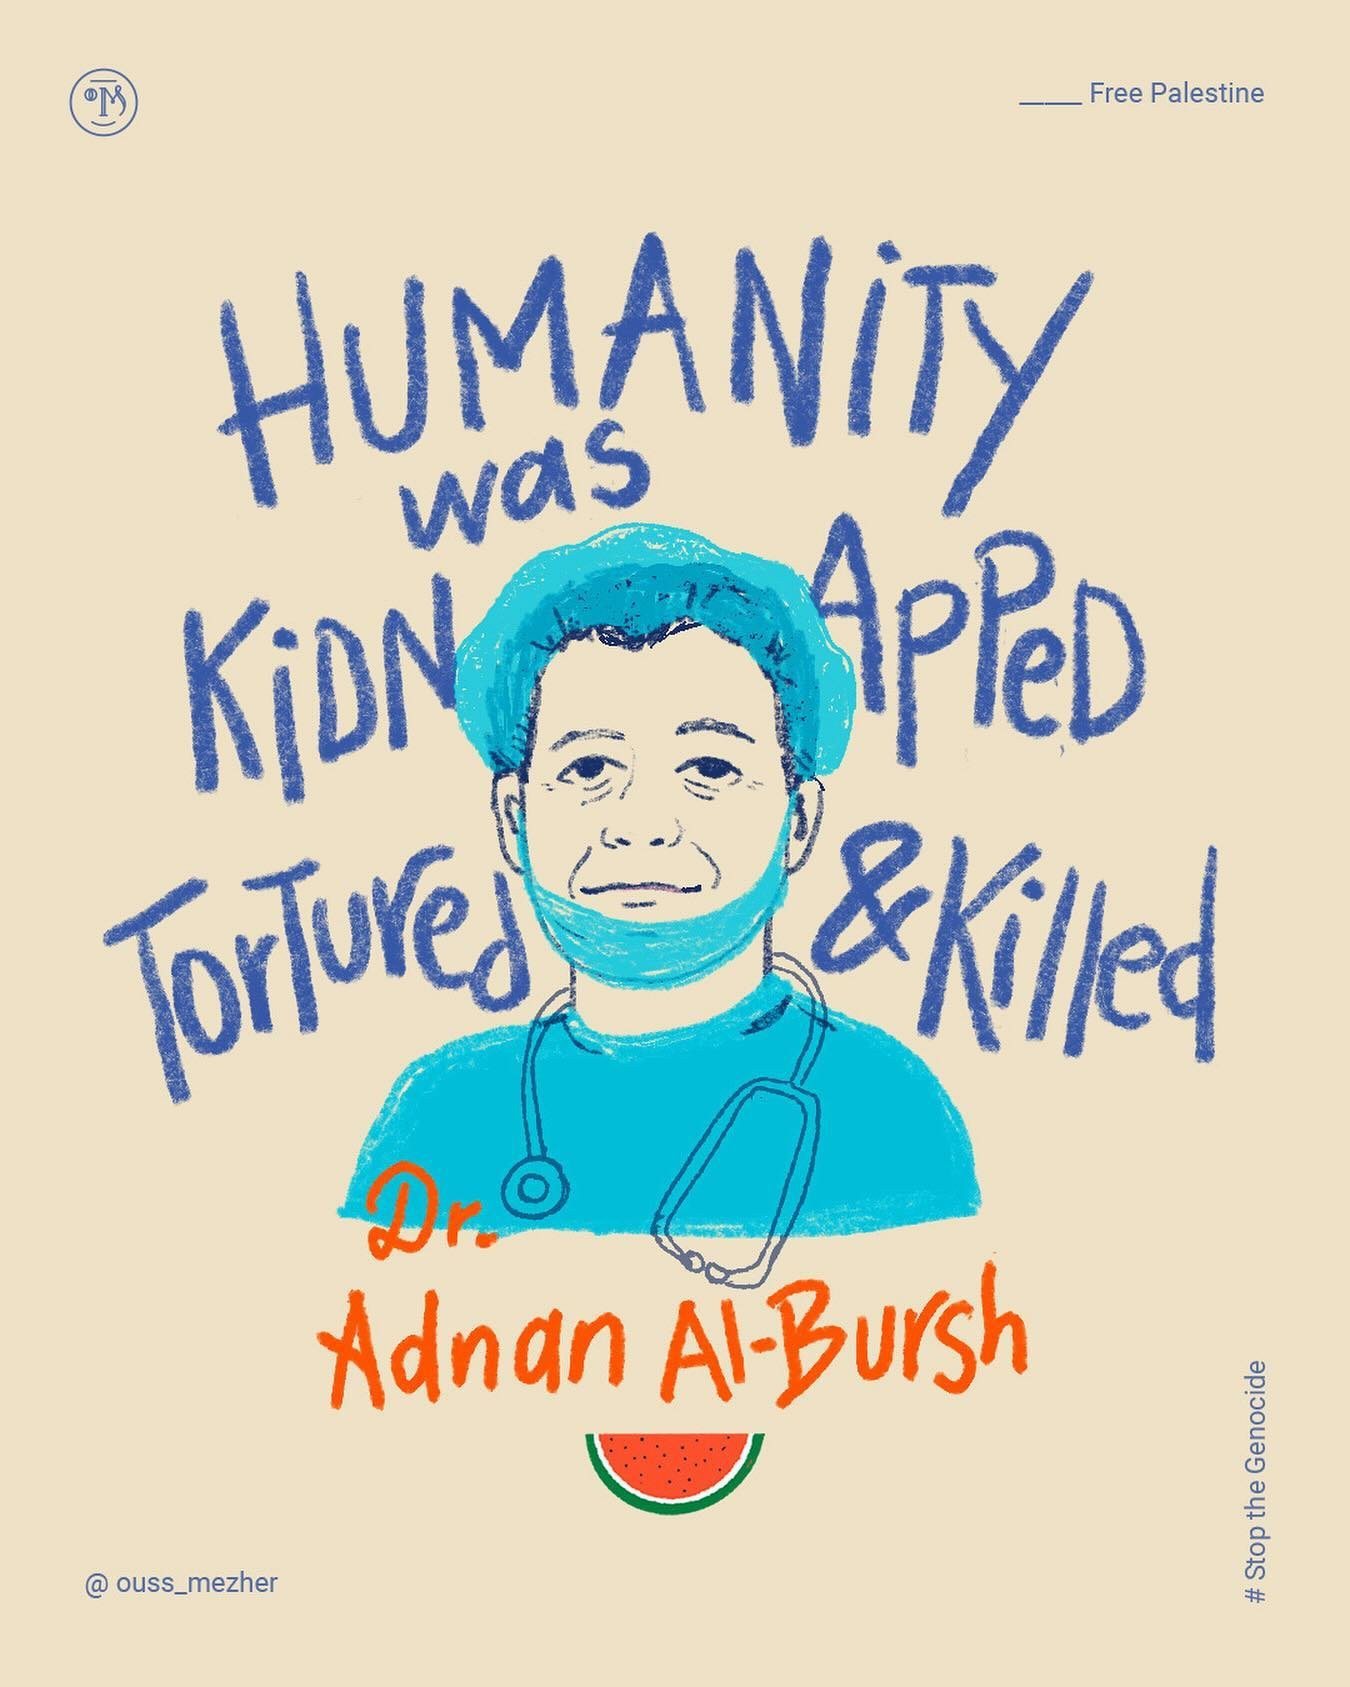 Humanity Died&hellip;
Tribute to Dr Adnan al-Bursh a great human being.
No justice No peace 
.
.
#freepalestine #stopgenocideingaza